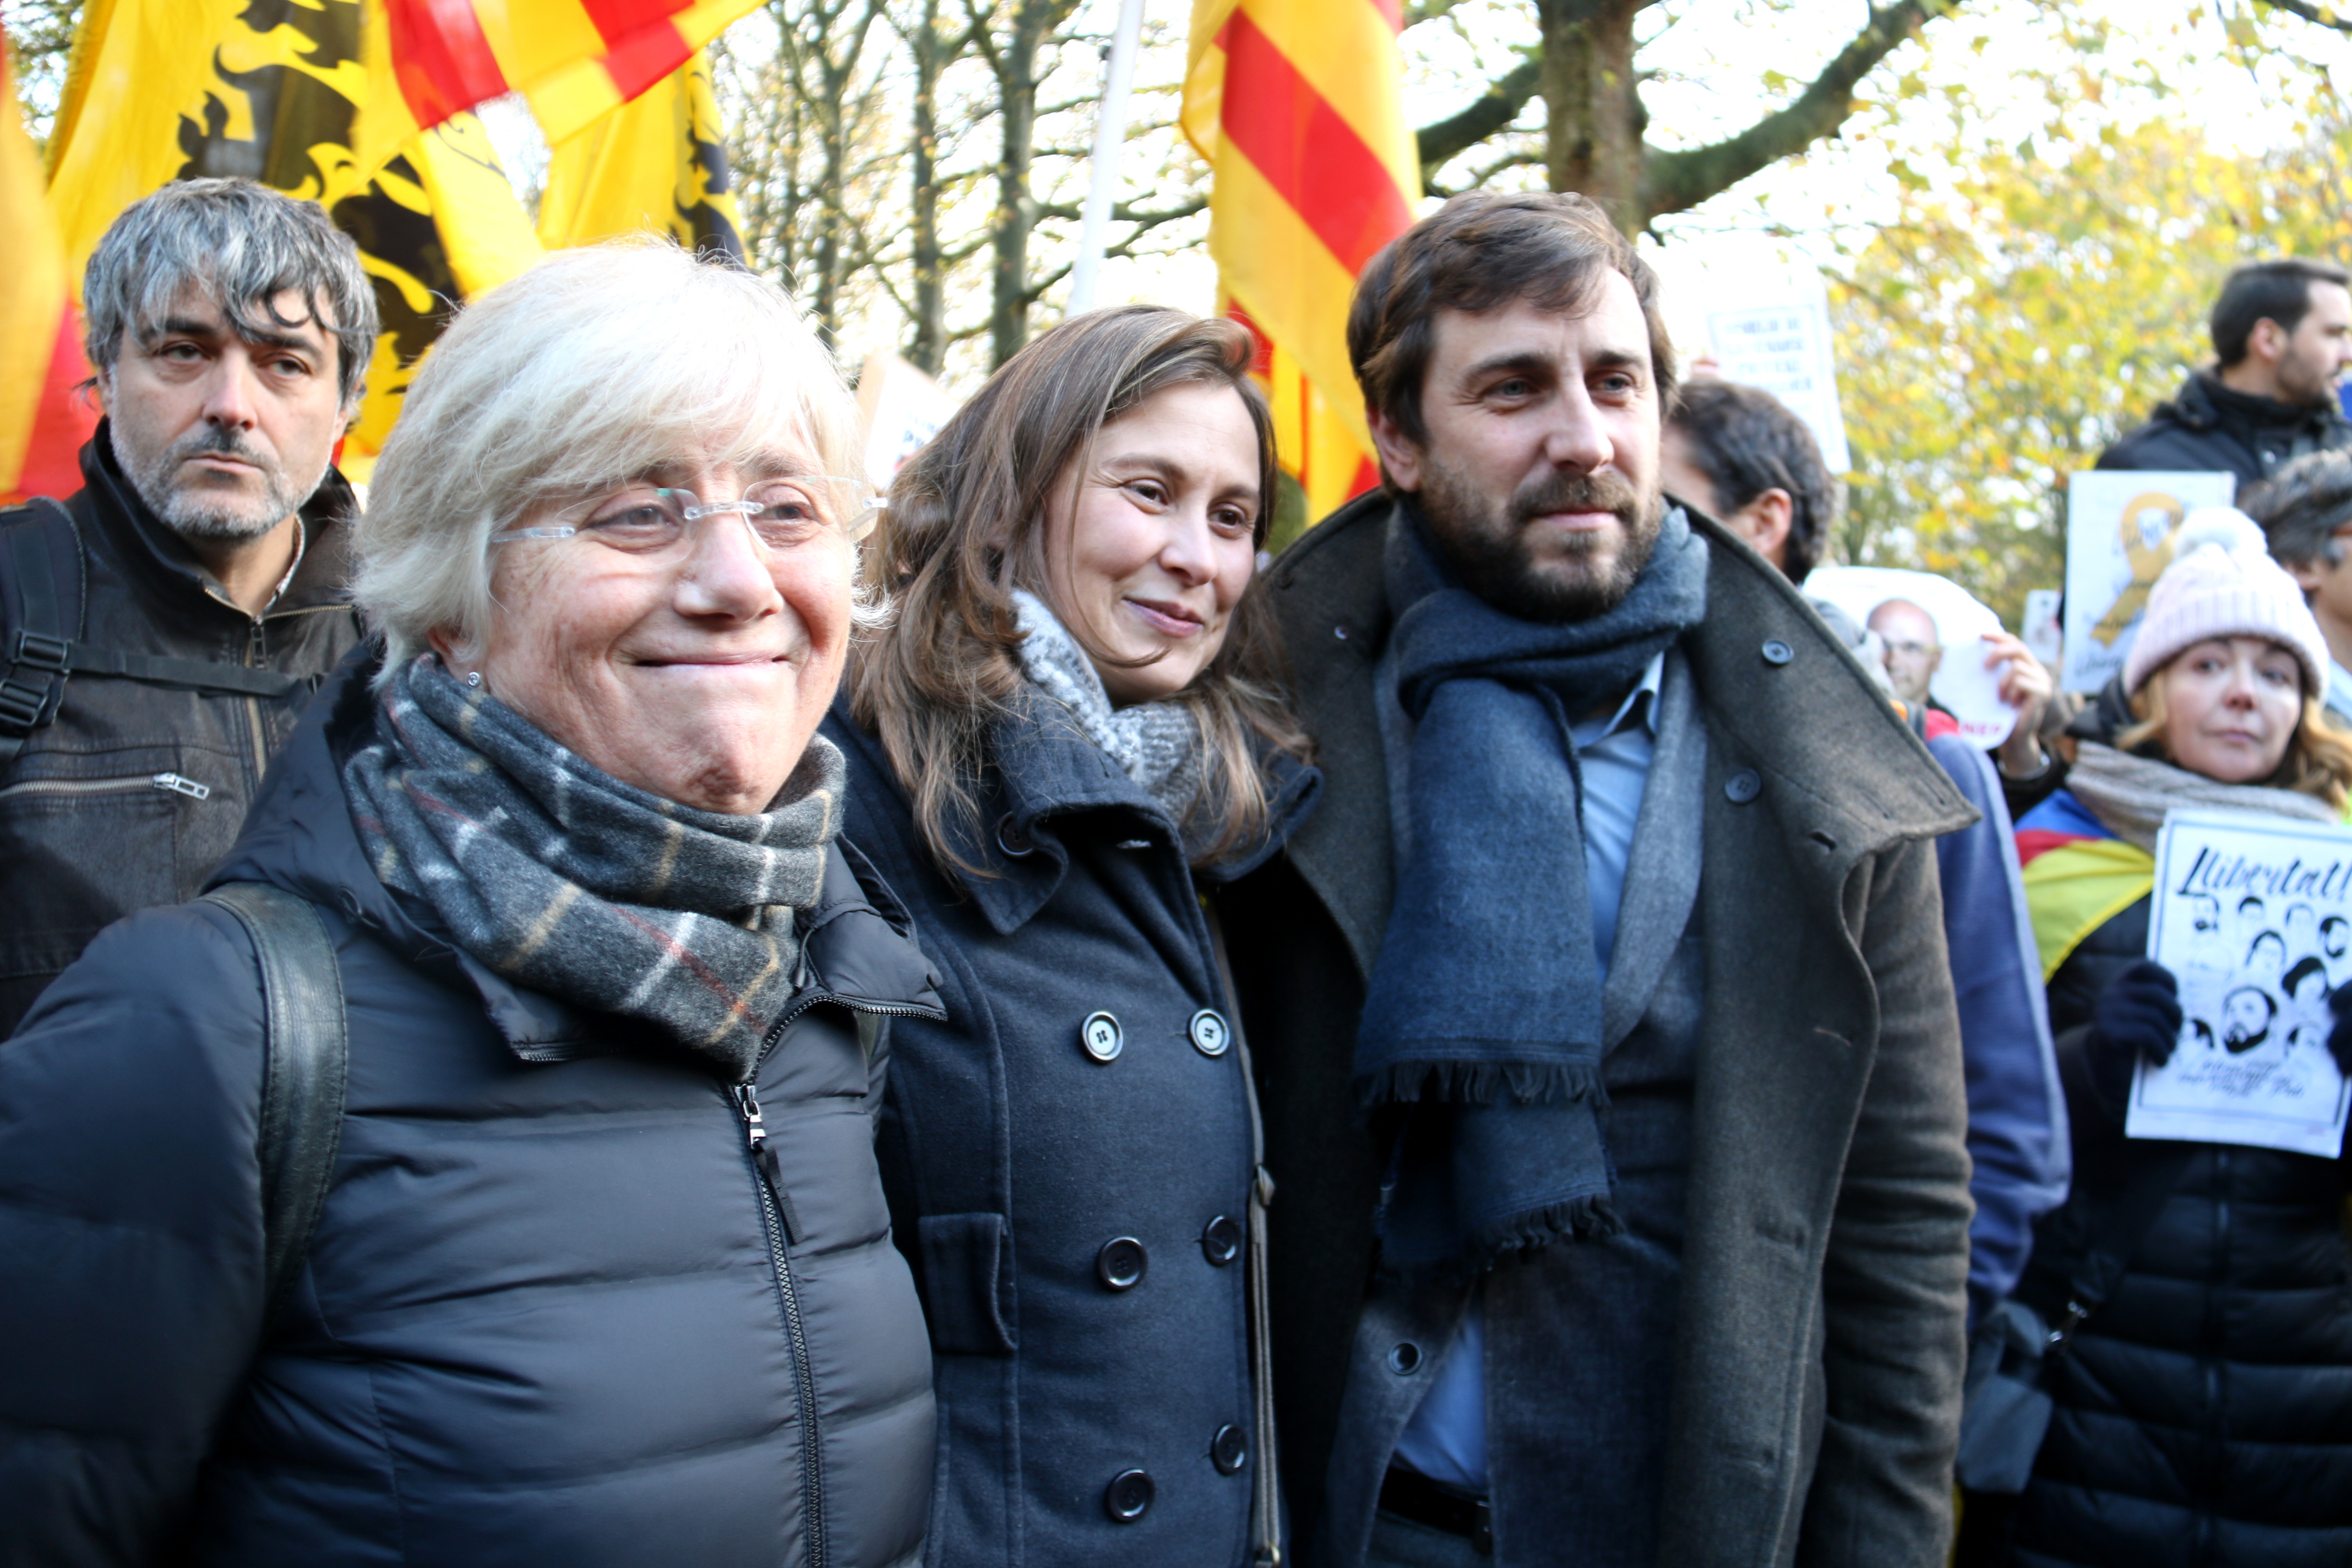 Deposed Catalan ministers Toni Comín, Meritxell Serret and Clara Ponsatí in the demonstrations in Brussels on November 12 2017 demanding the release of political prisoners (by ACN)